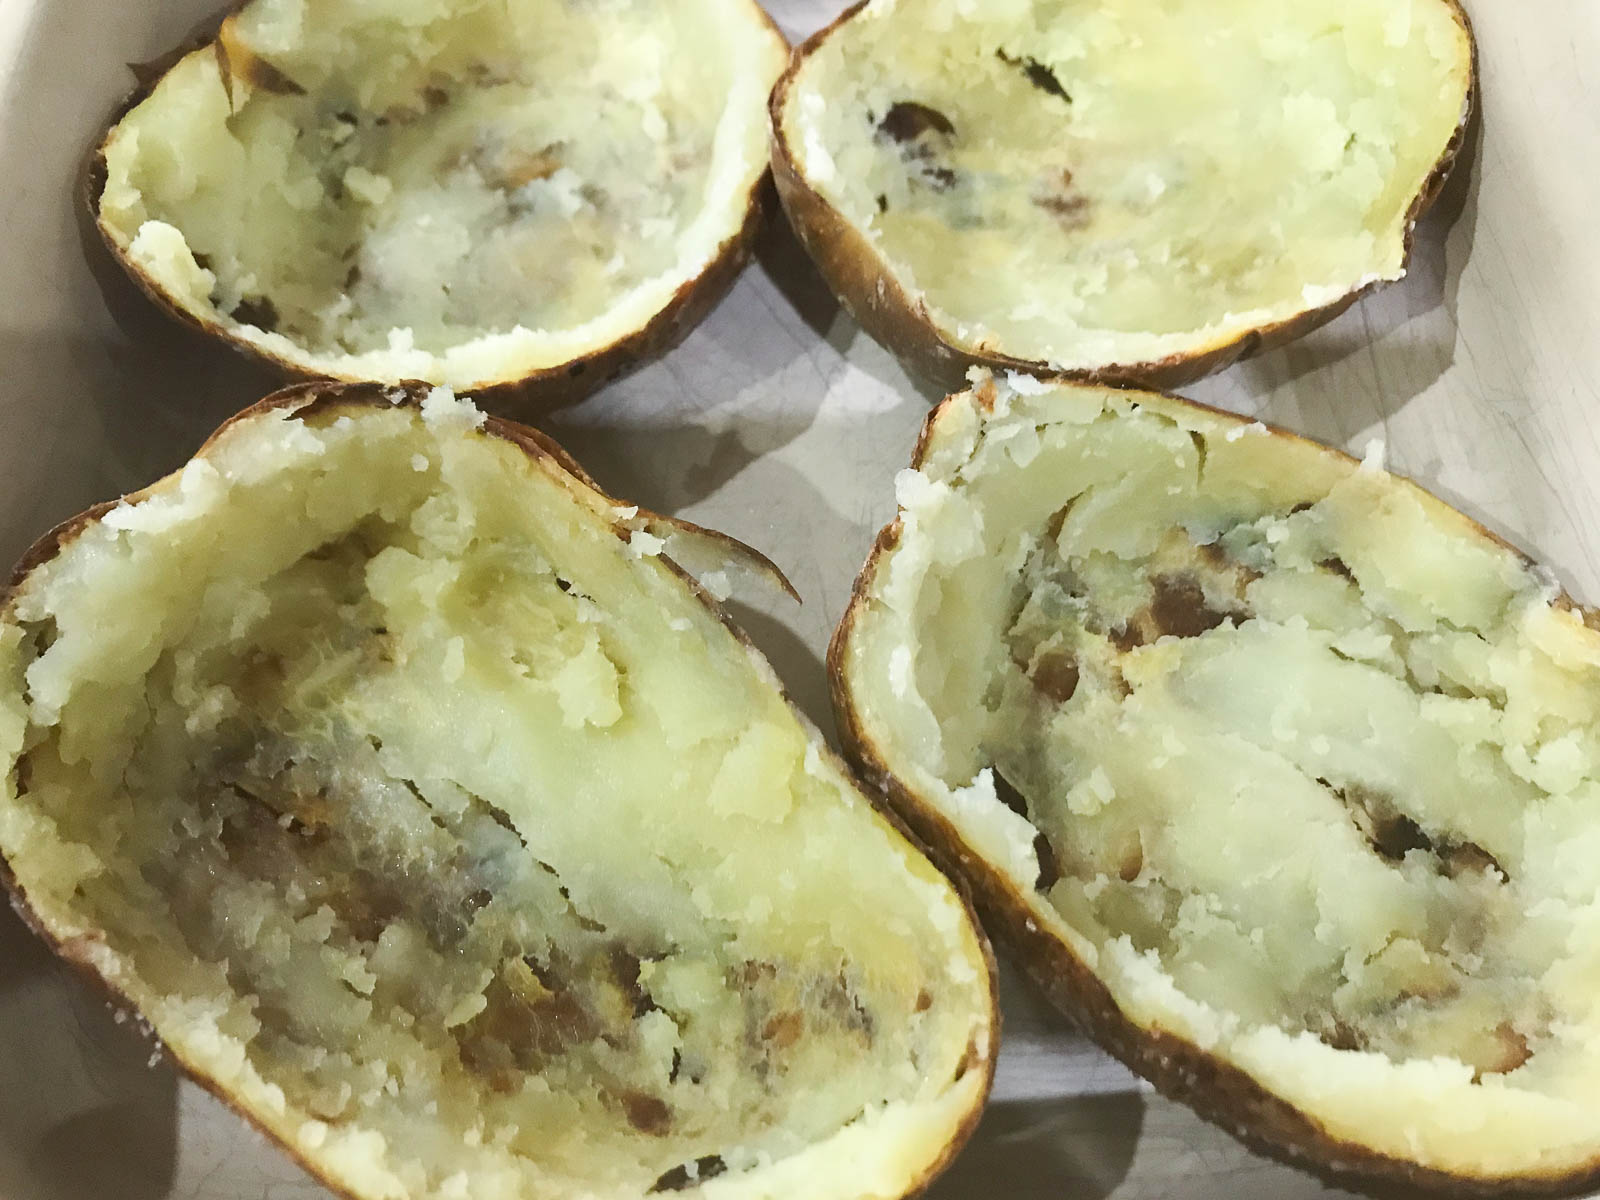 Baked potatoes with the insides scooped out to leave the baked skins.